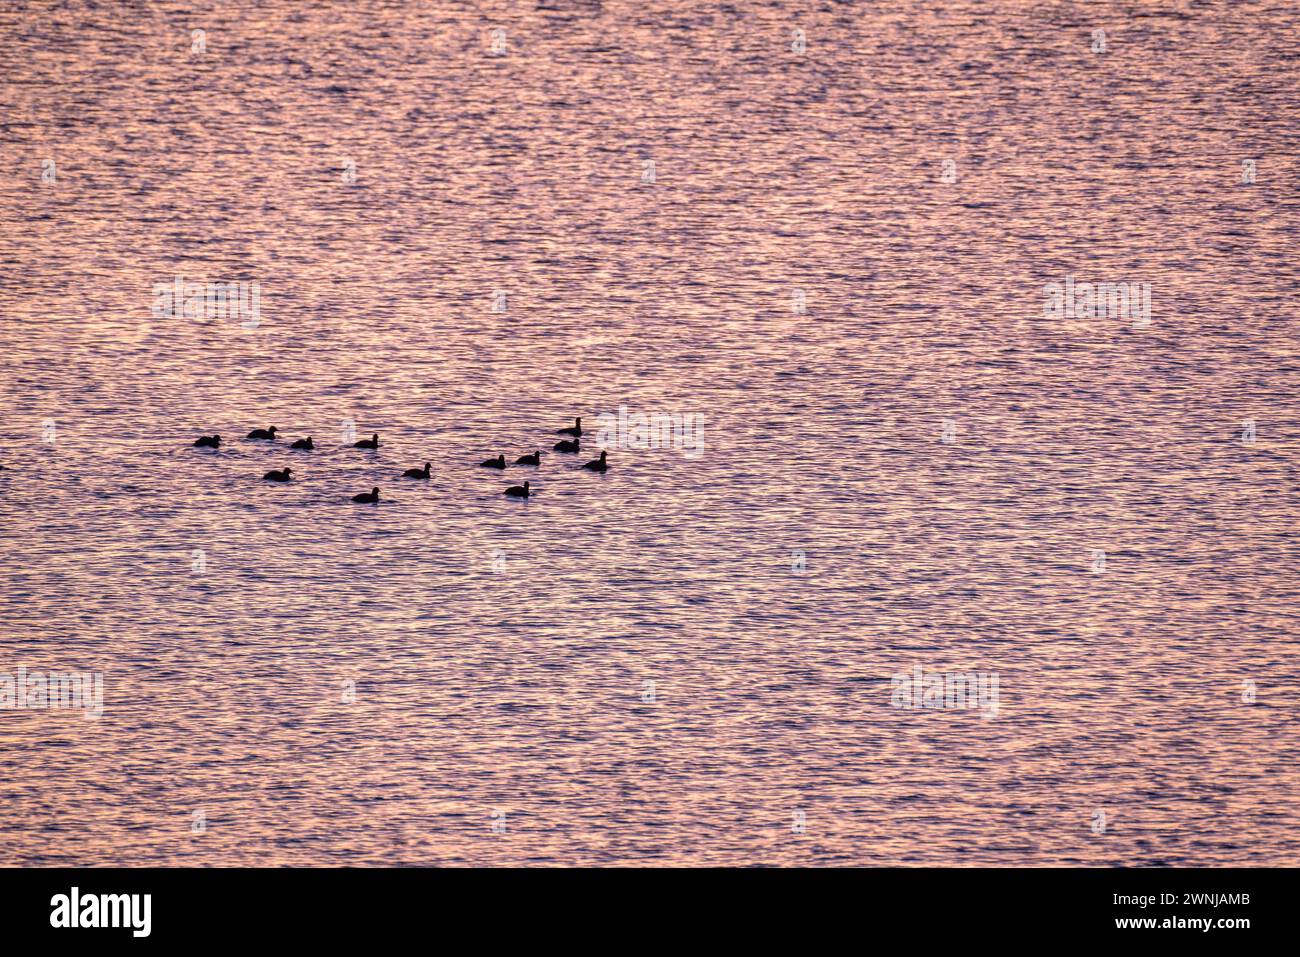 Some ducks at sunrise on the Ebro river seen from the Zigurat viewpoint, at the mouth of the Ebro River (Tarragona, Catalonia, Spain) Stock Photo